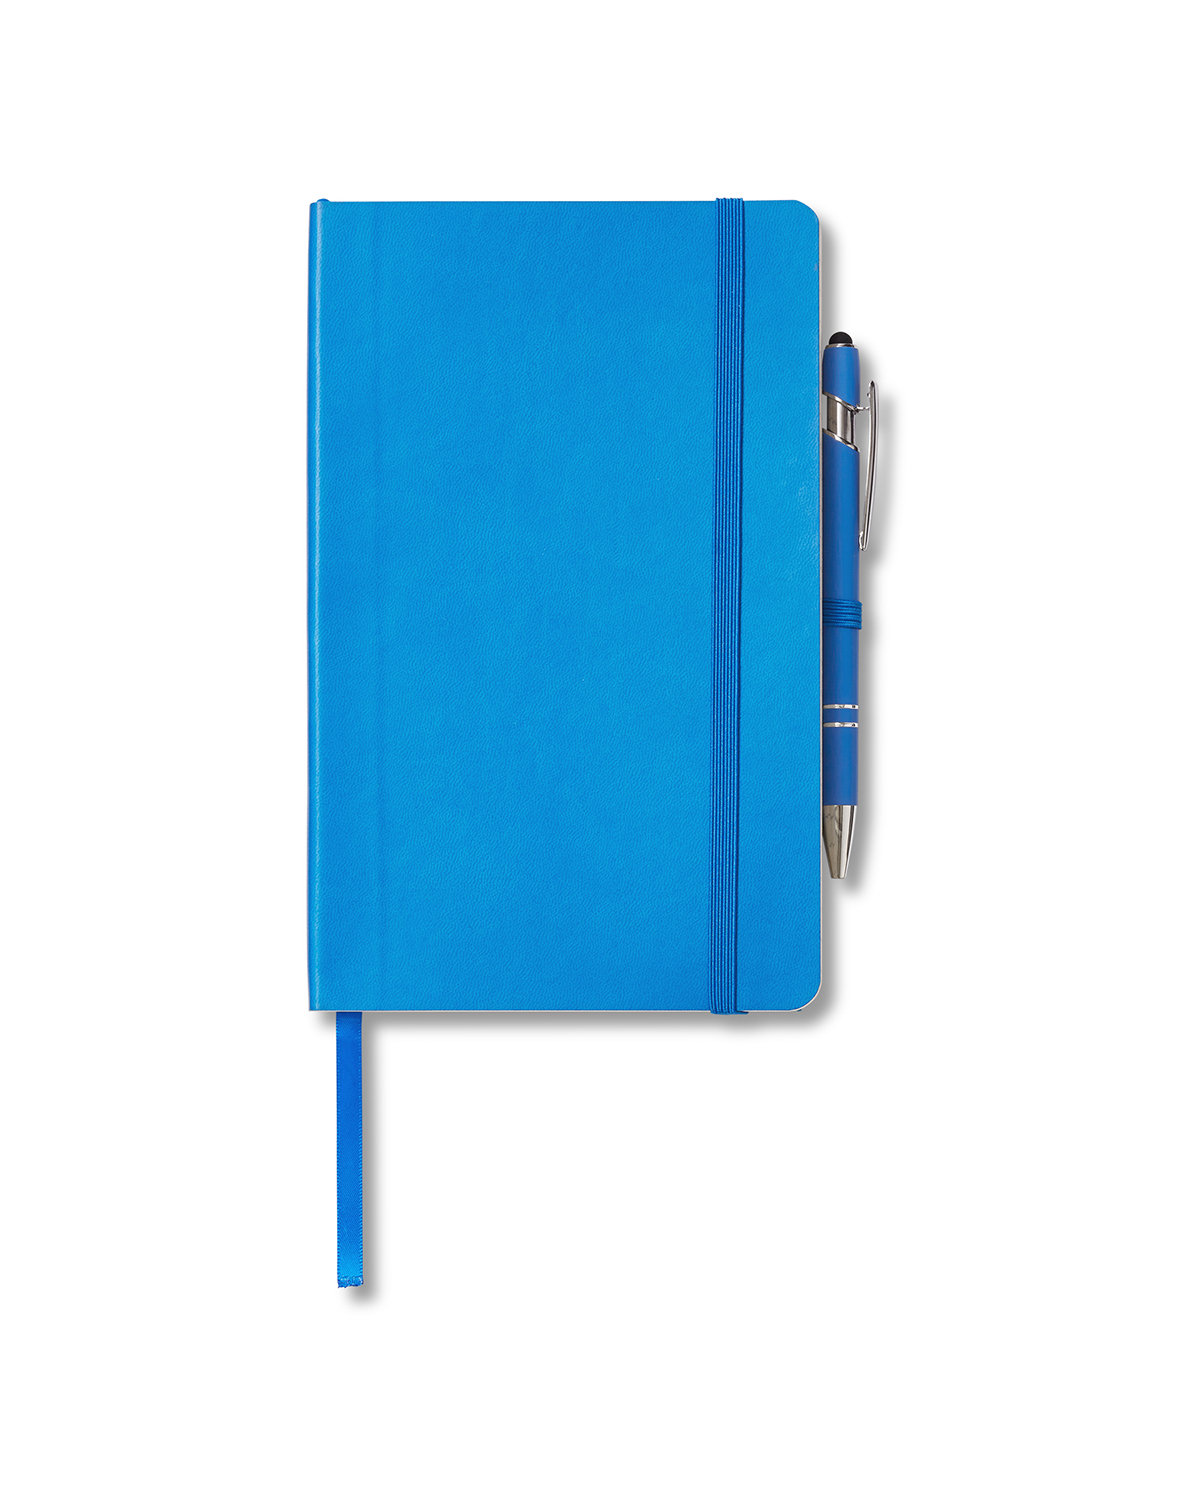 CORE365 Soft Cover Journal And Pen Set electric blue 